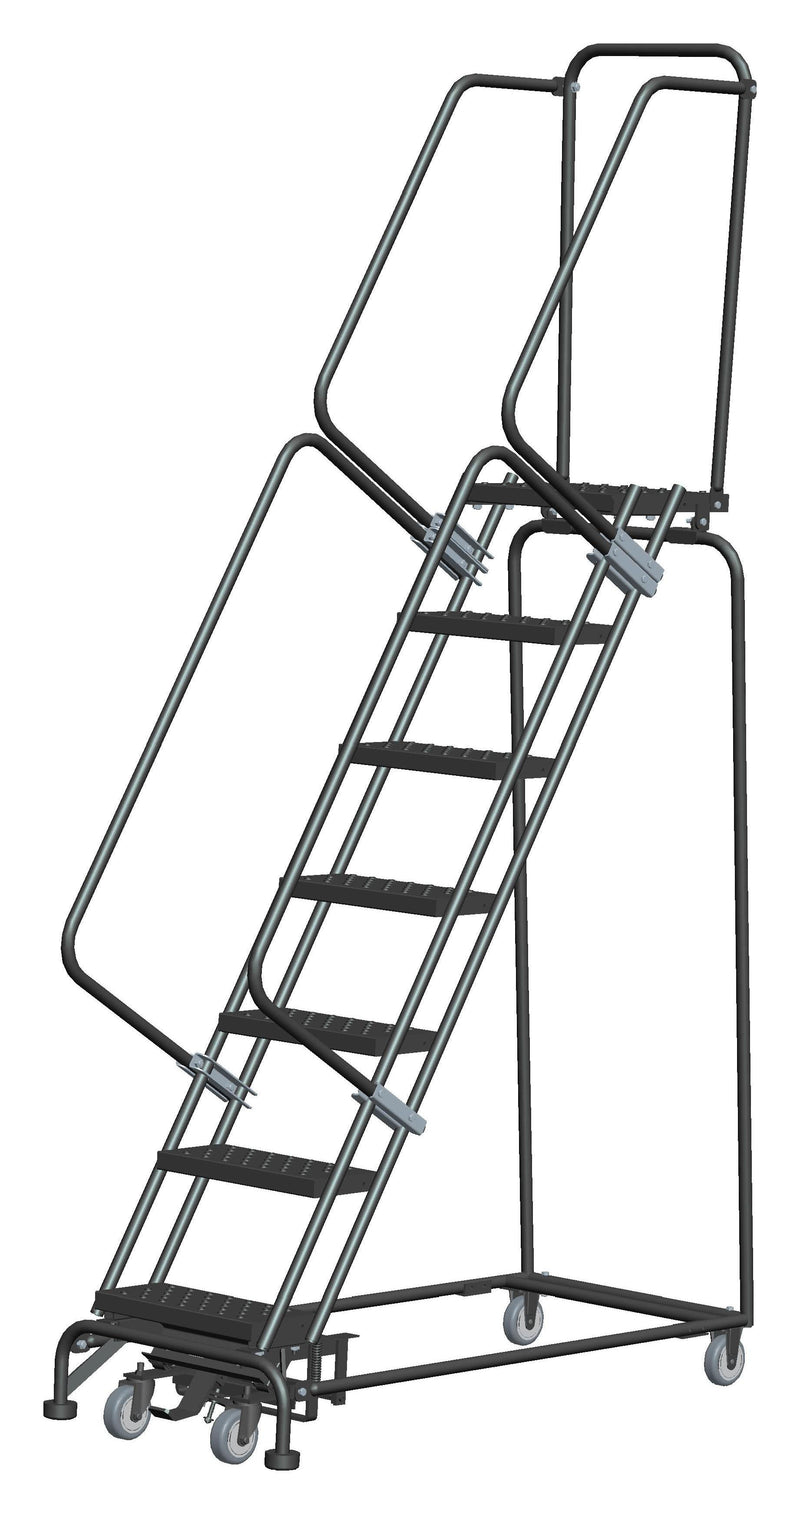 Rolling Ladder - M-2000 Series - 7 Step, Handrails - Ballymore